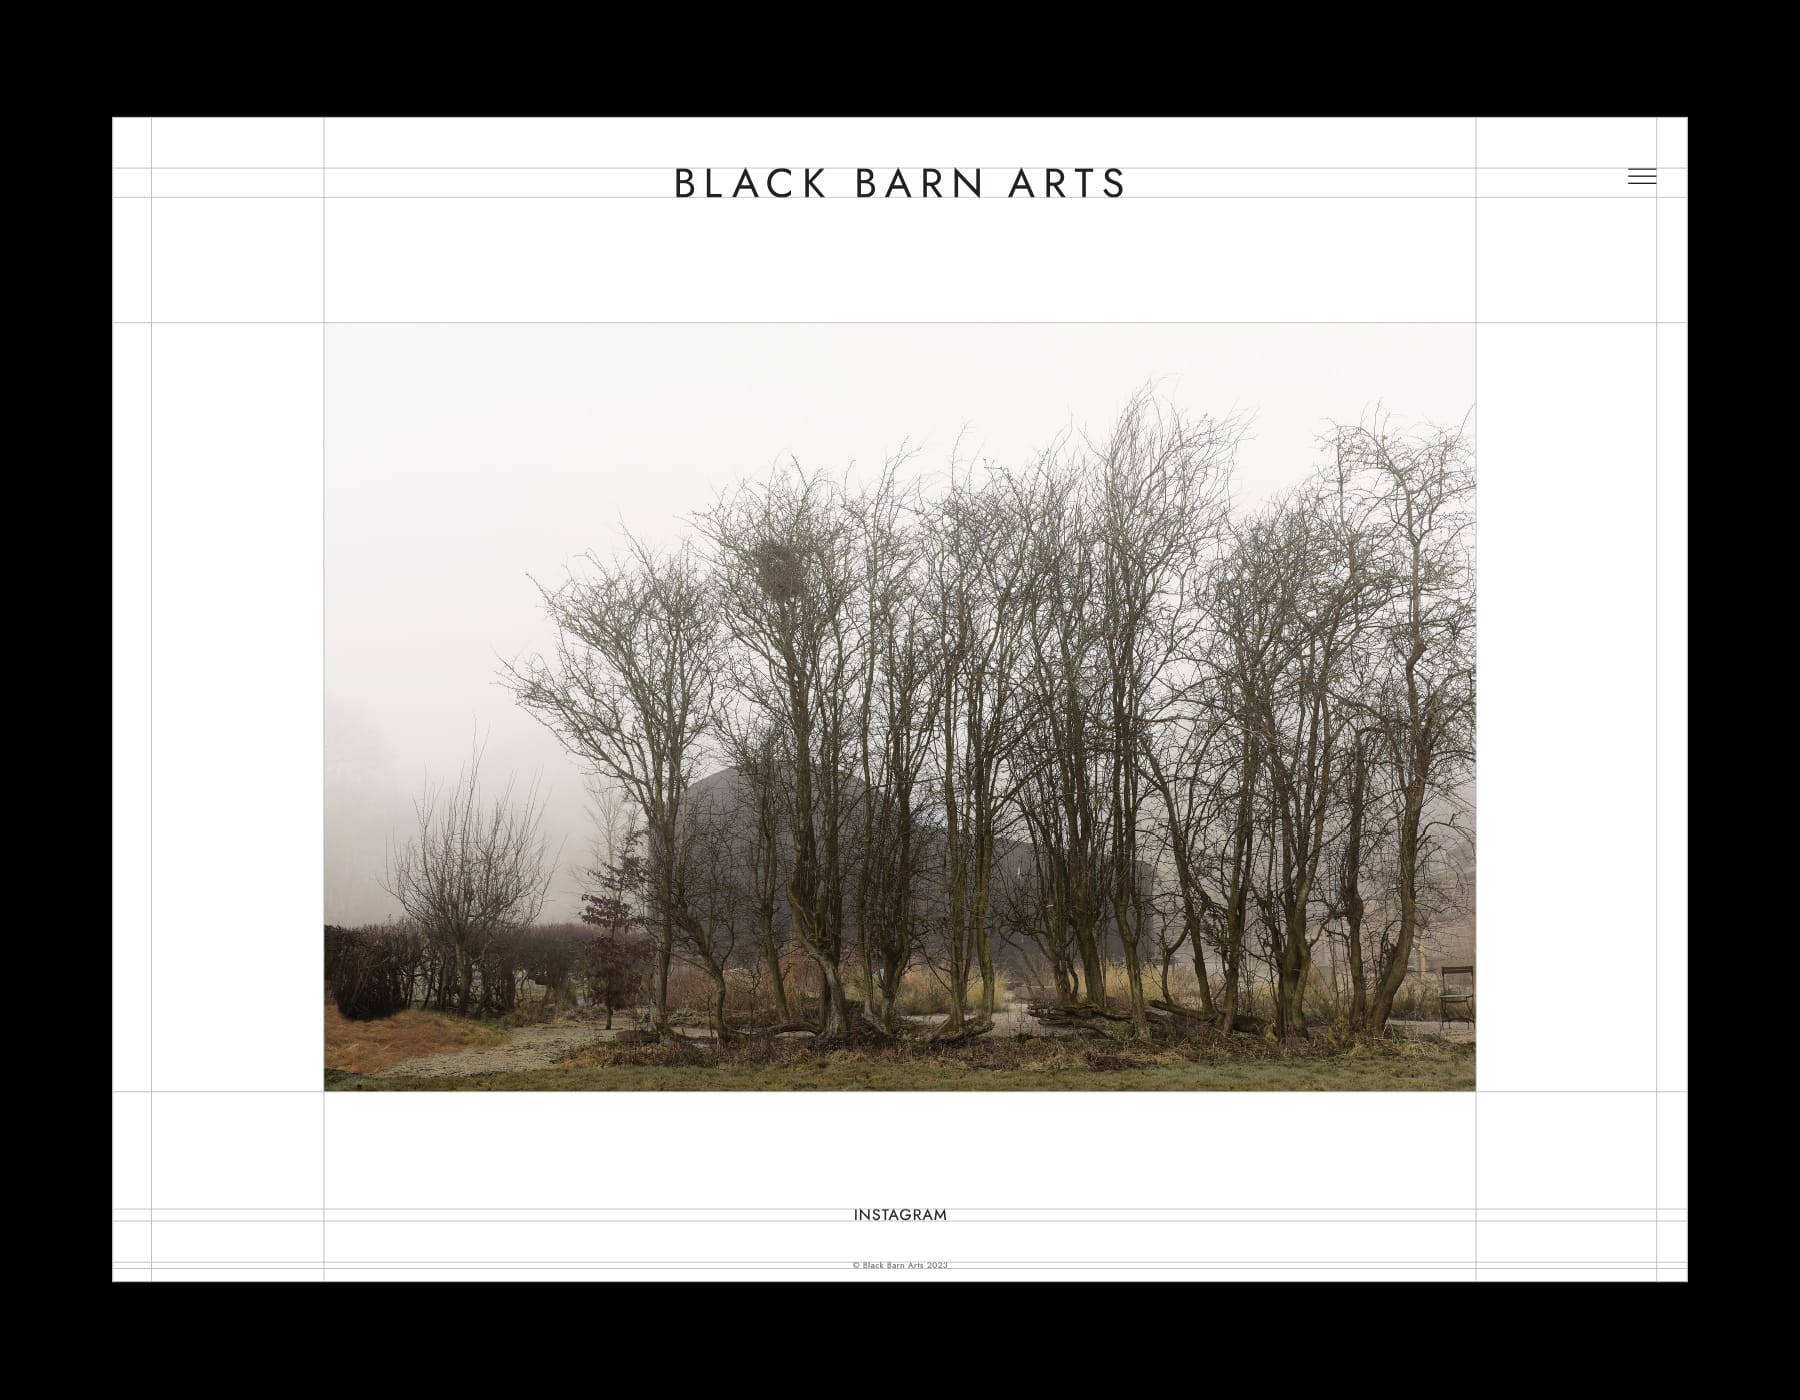 Black Barn Arts website by Colour Format